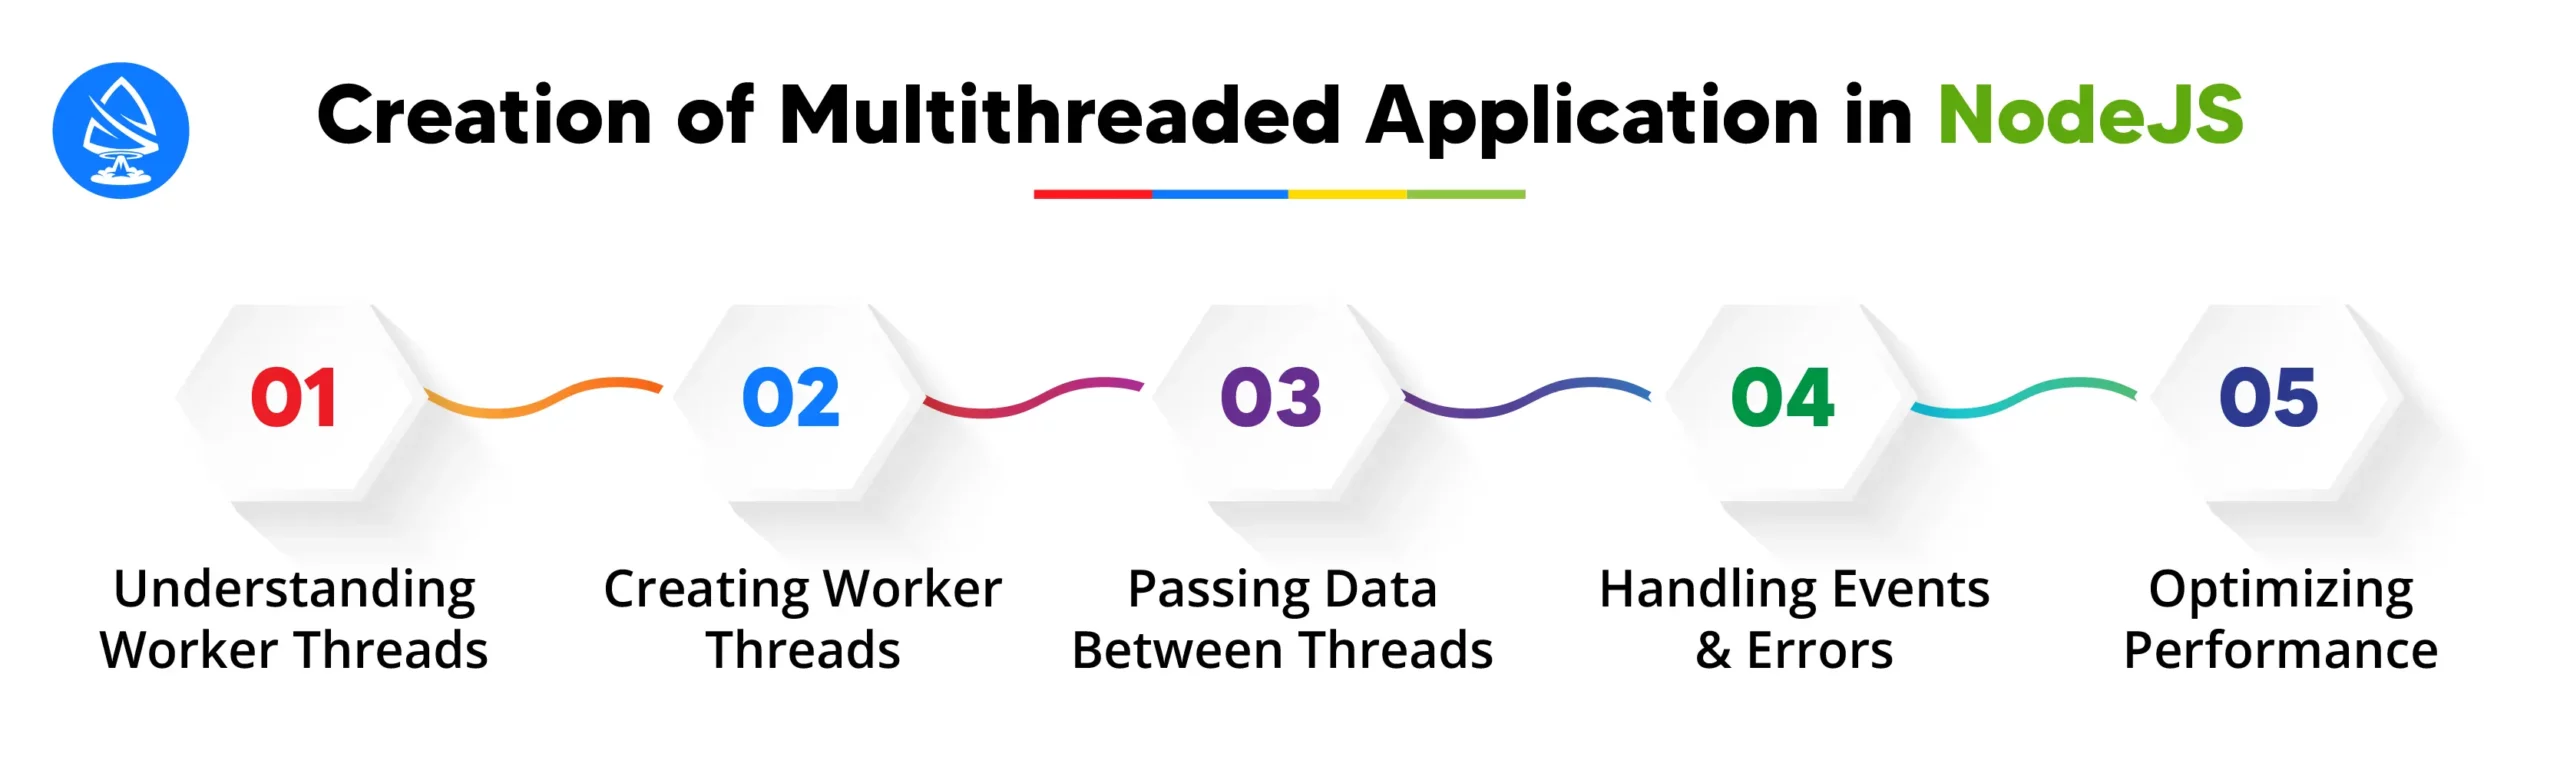 Creating Multithreaded Application in Node.JS 